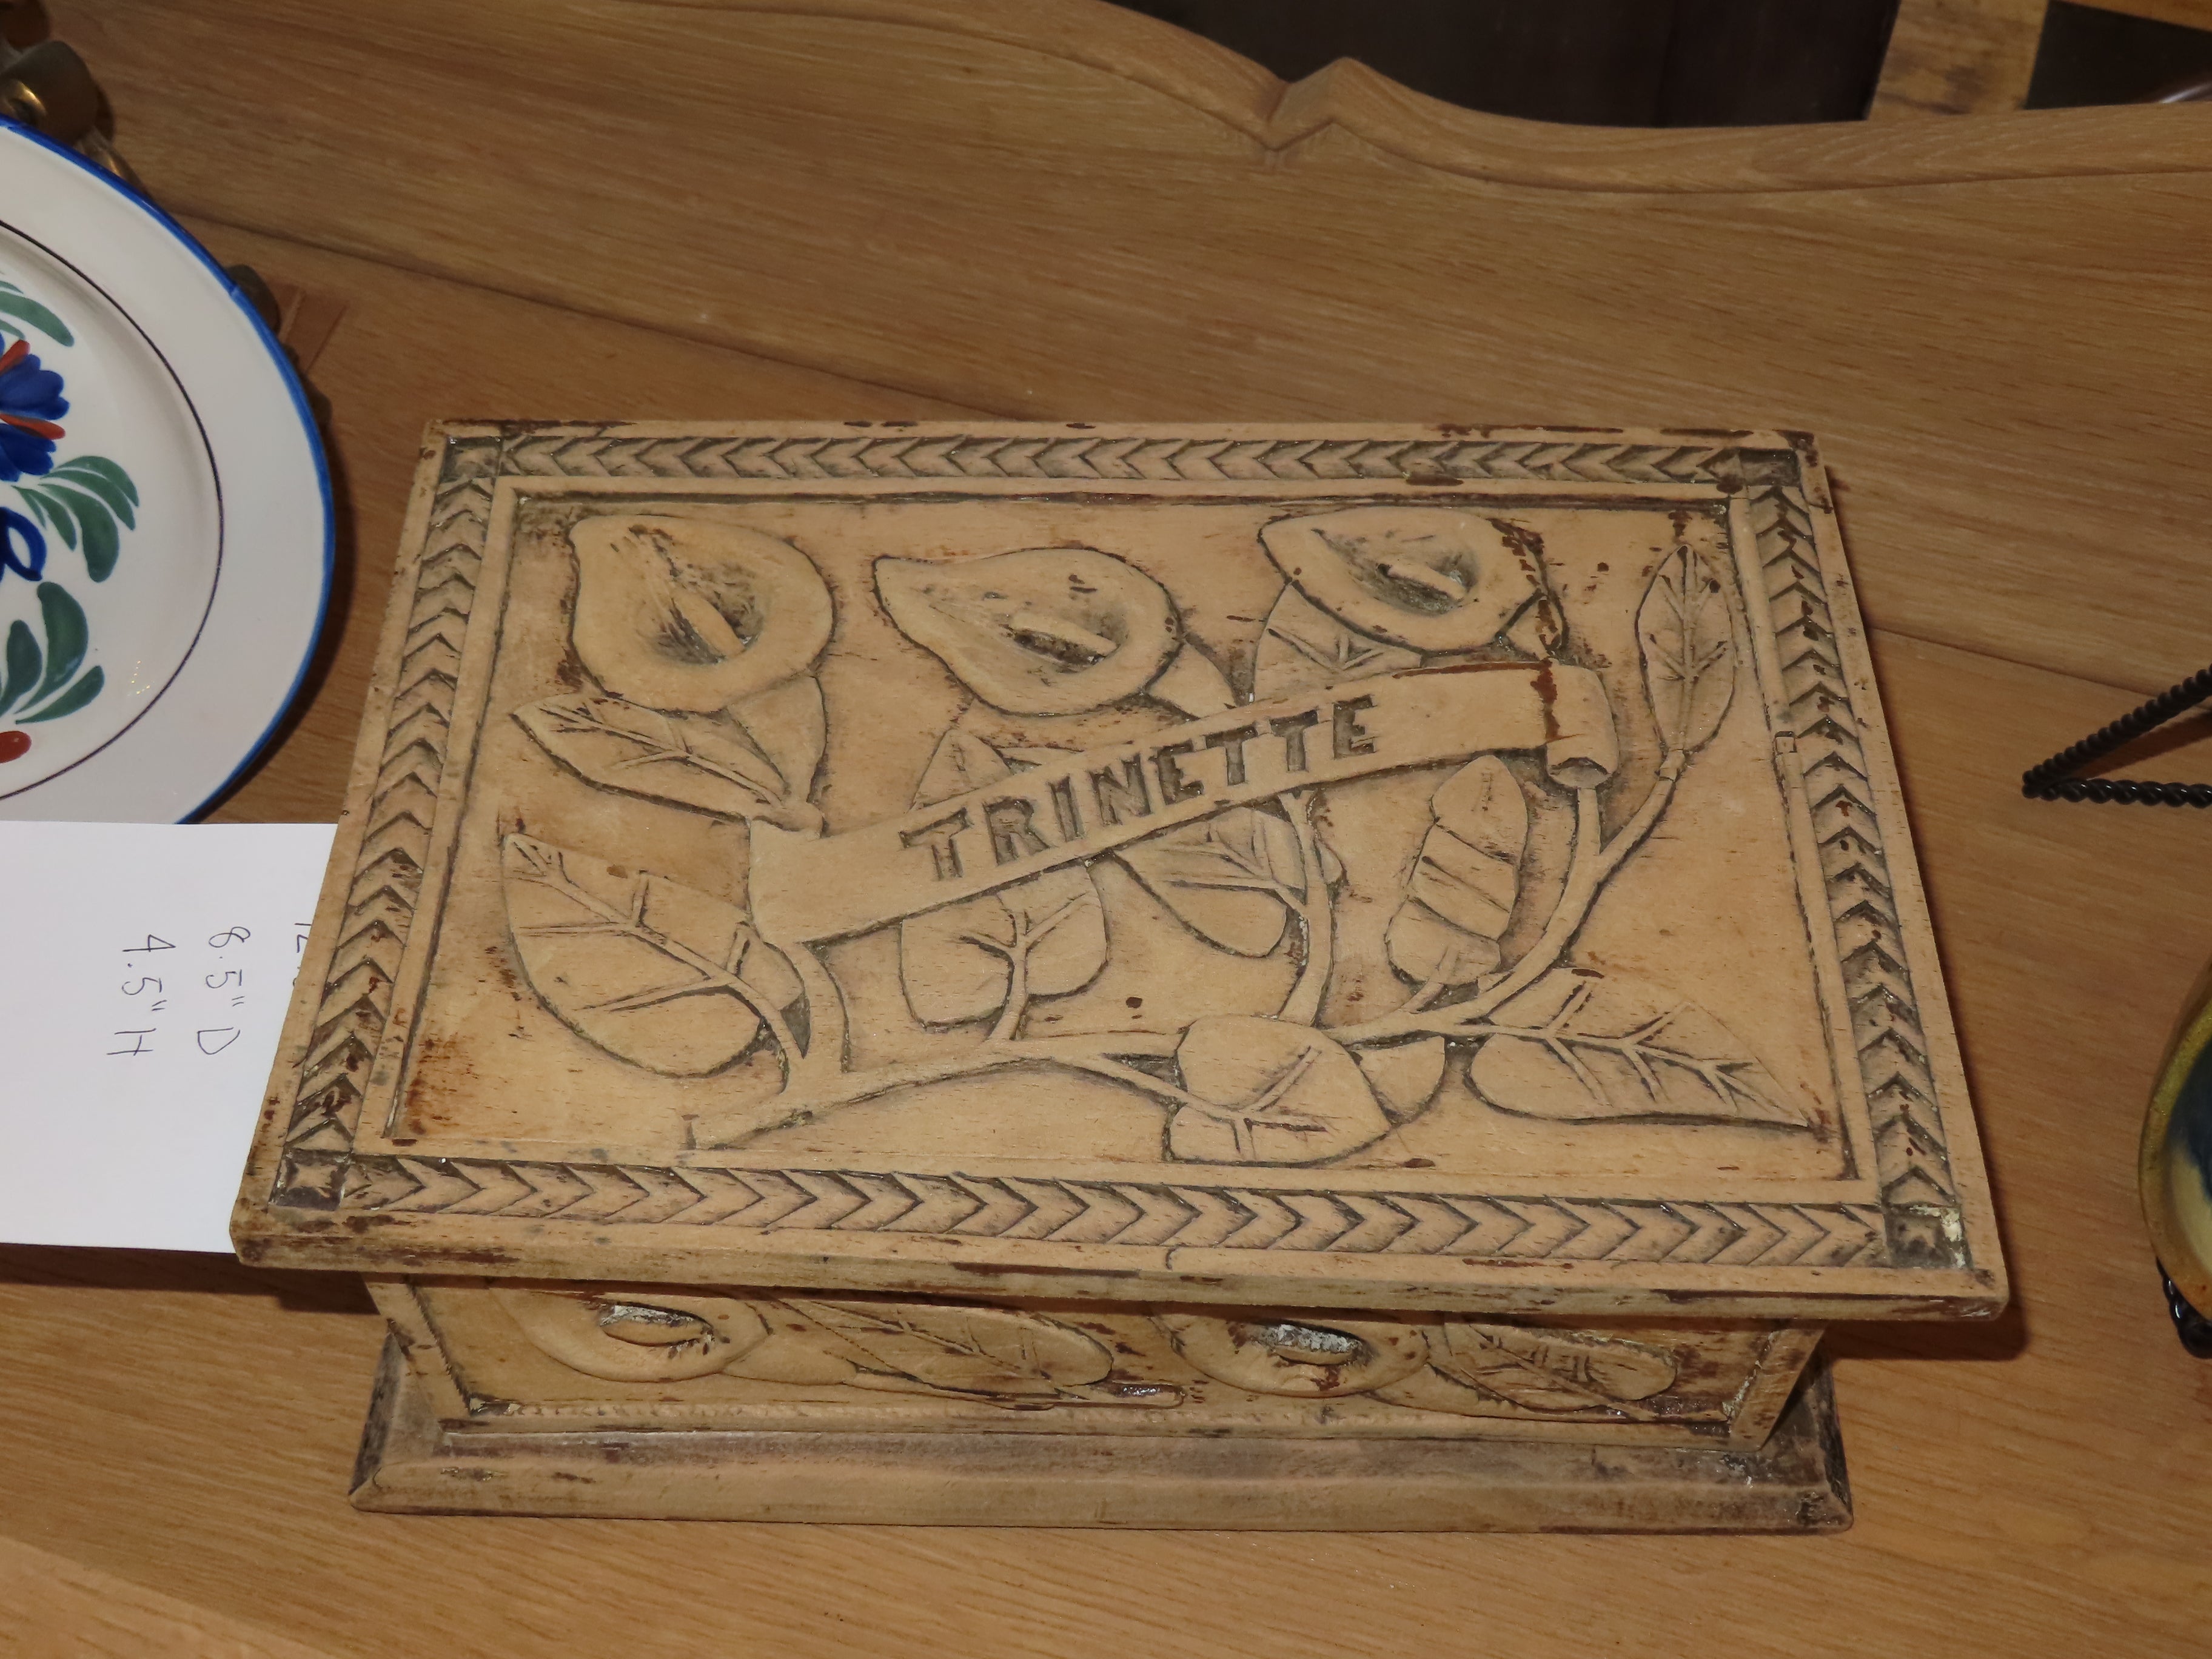 Hand Carved Antique Box